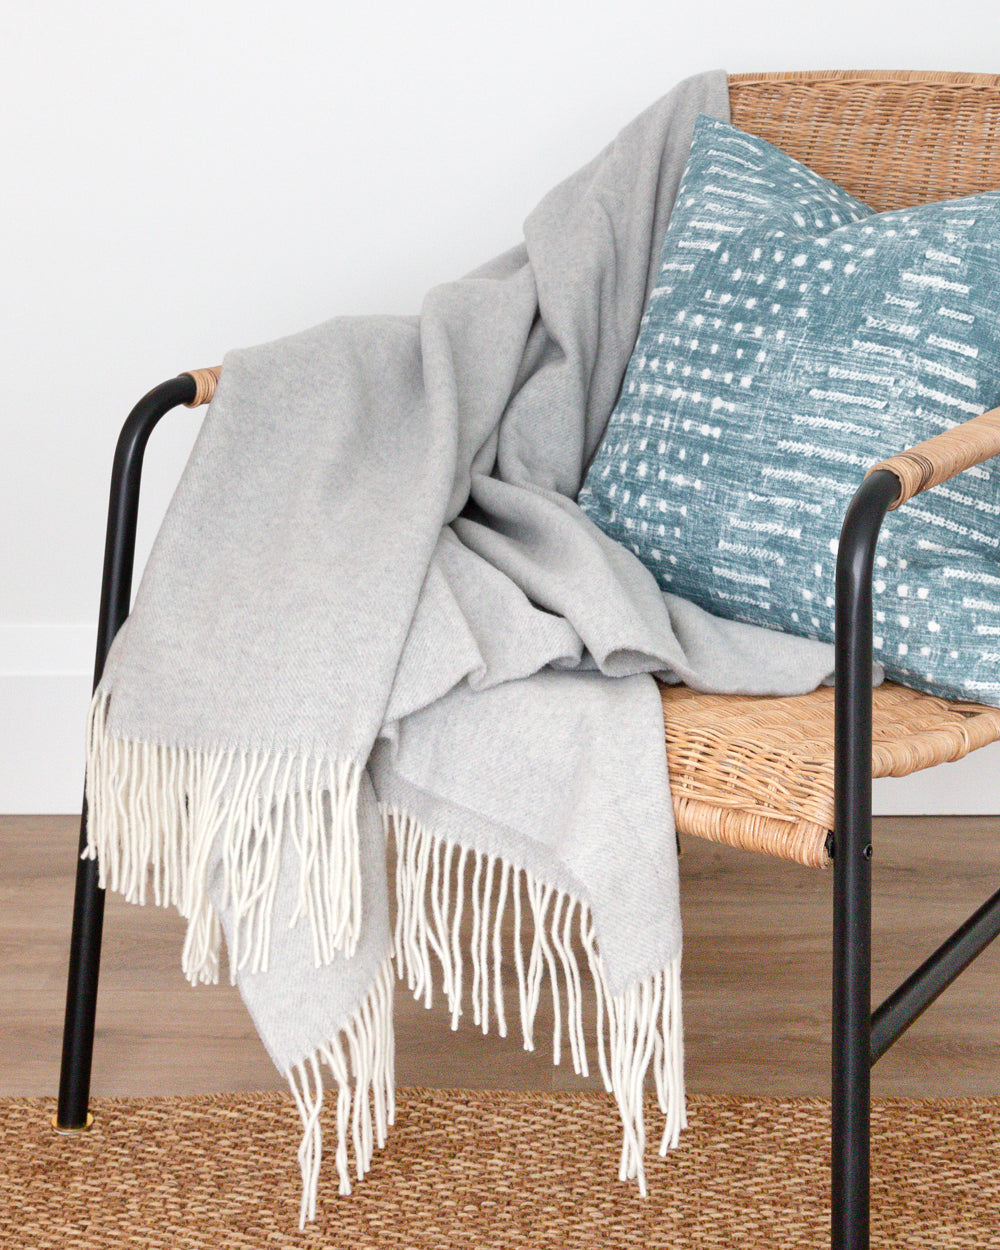 Close up detail of Haliburton grey wool throw with fringe sitting on rattan chair with blue pillow